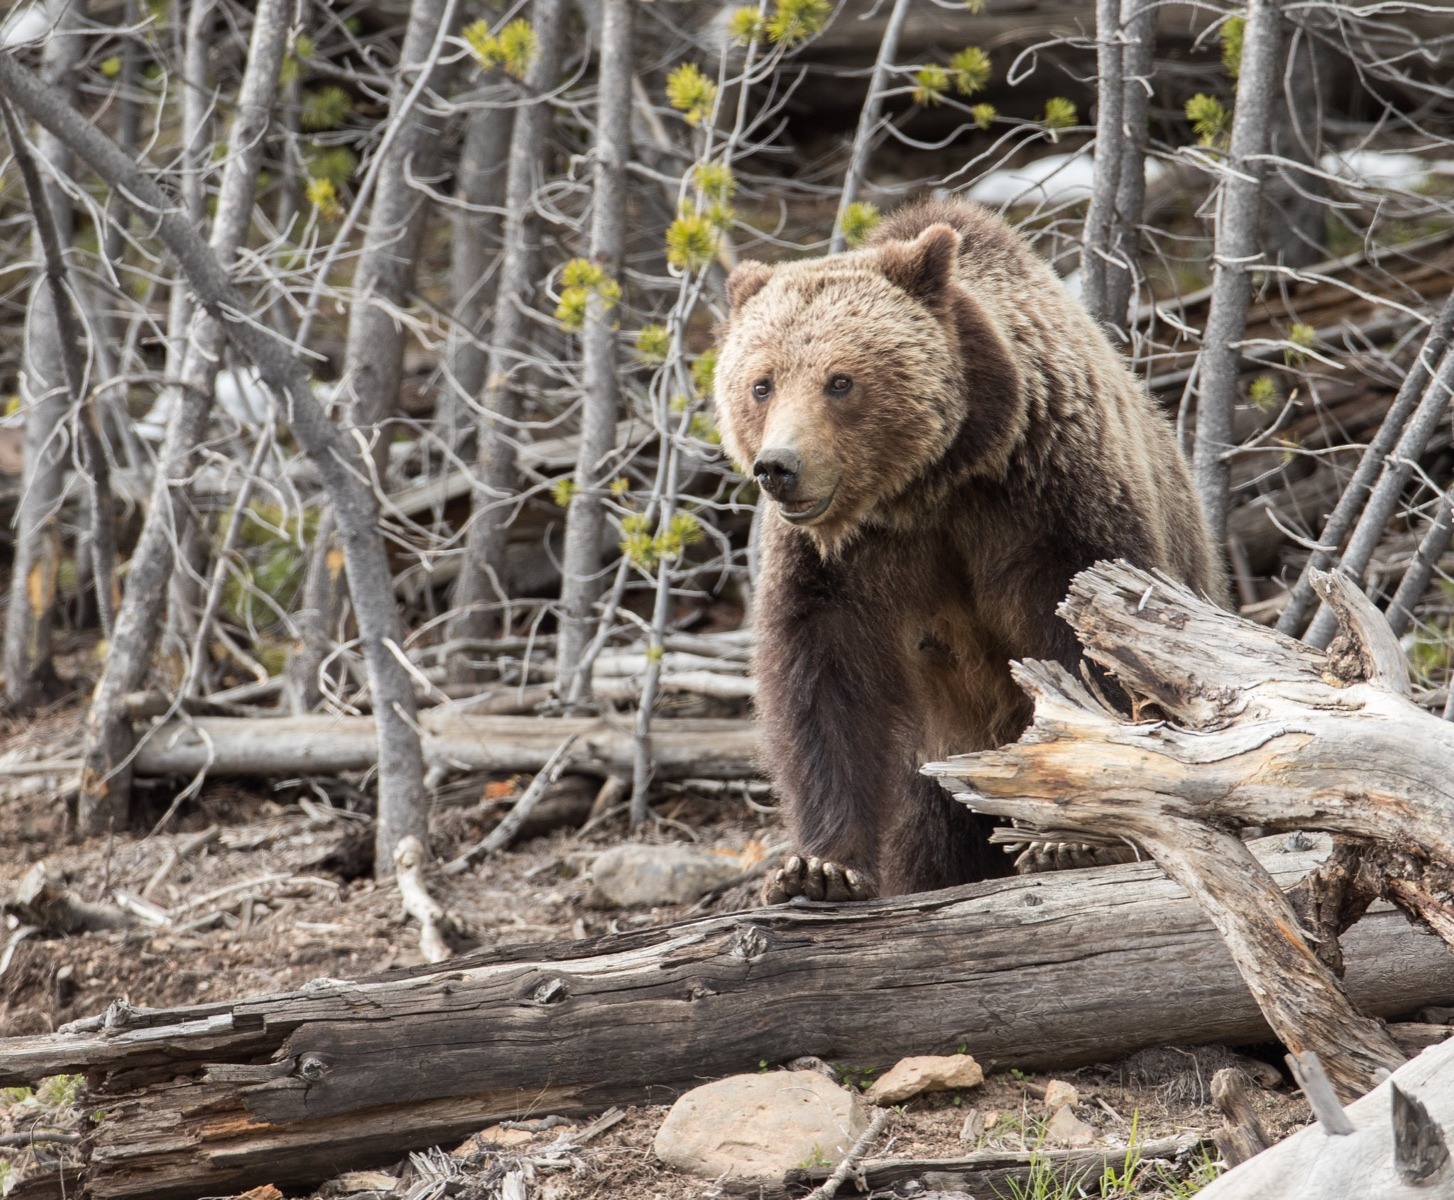 A grizzly wanders in the forest in Yellowstone. This is not the bear believed involved in the incident with the hiker. Photo courtesy Jim Peaco/NPS